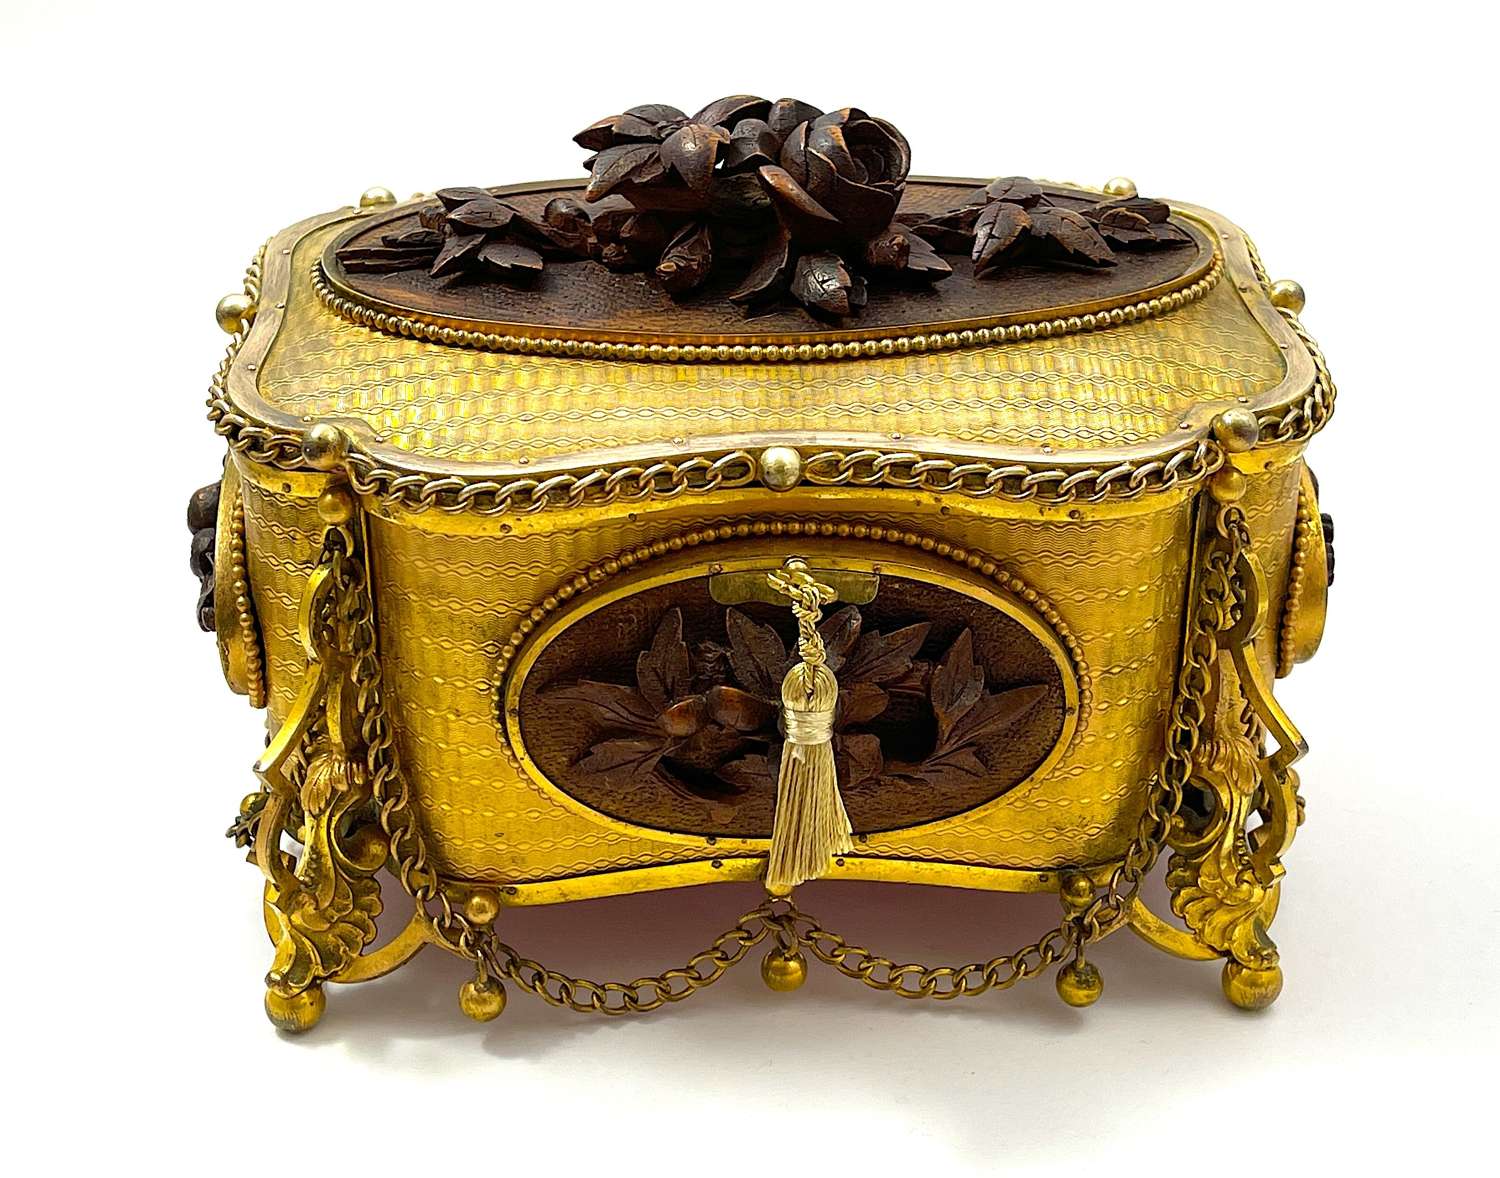 A Large Antique French Dore Bronze and Carved Wood Jewellery Box.